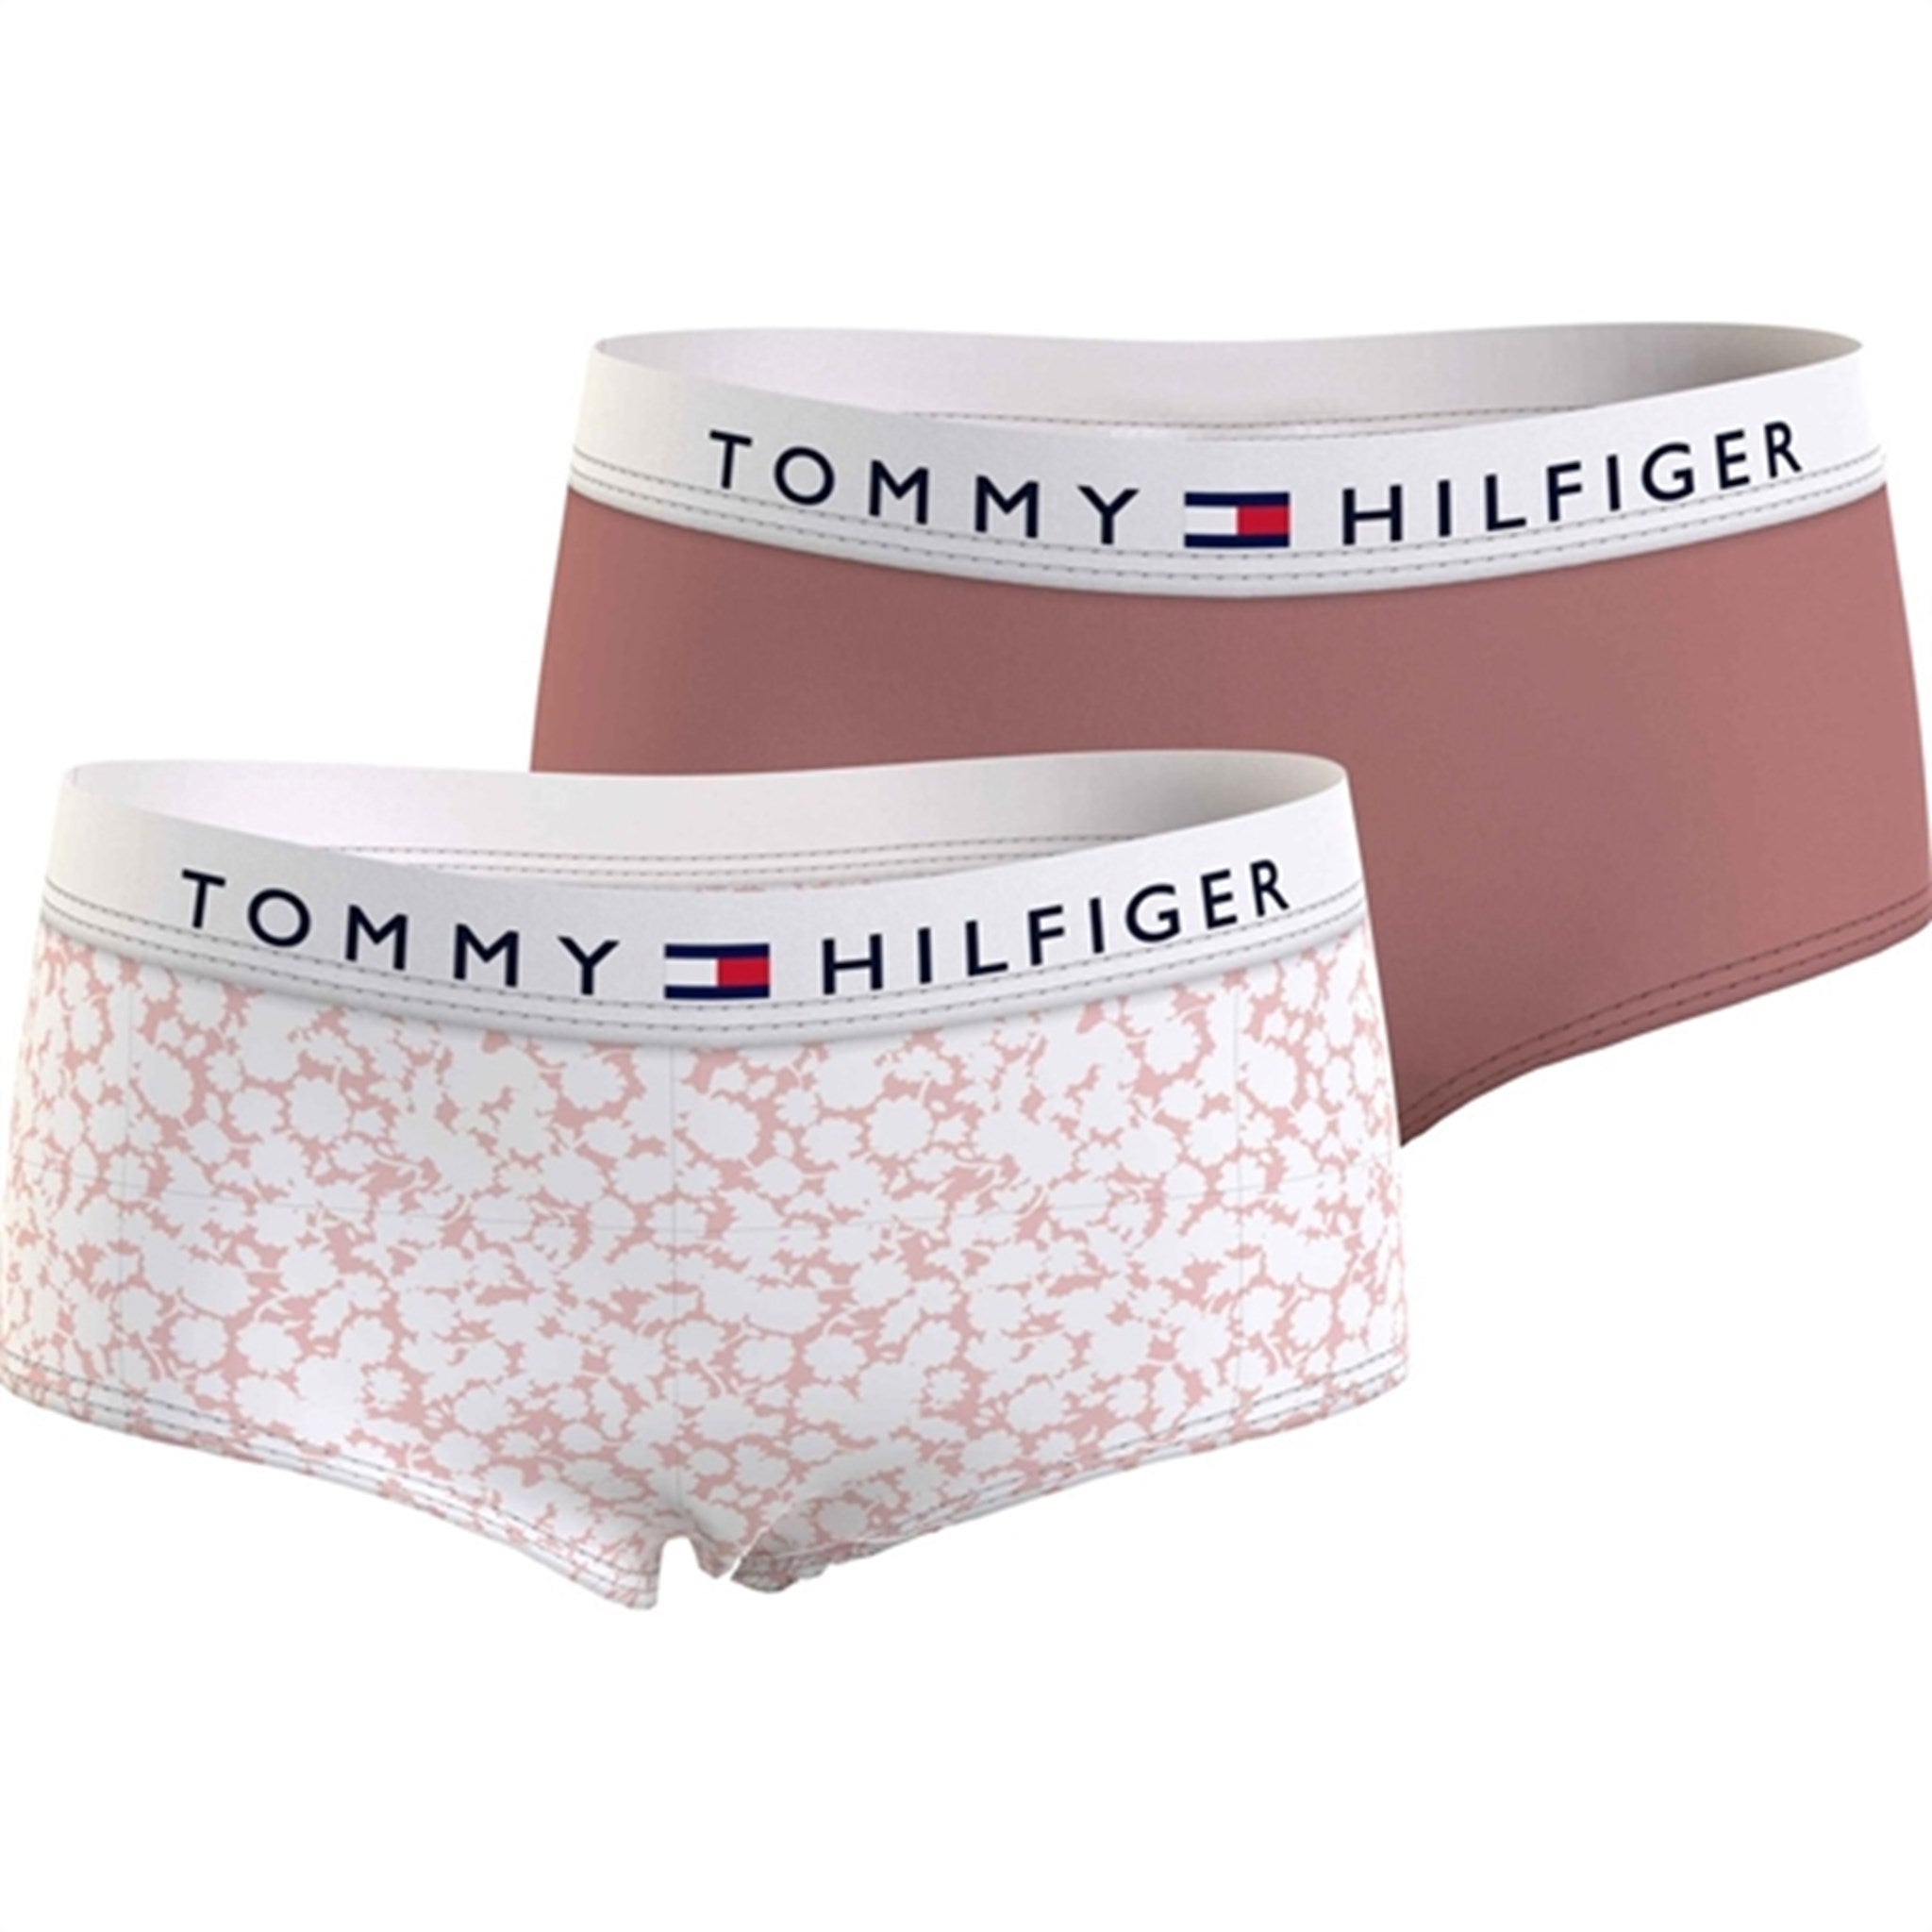 Tommy Hilfiger Briefs 2-Pack Printed Floral/Teaberry Blossom